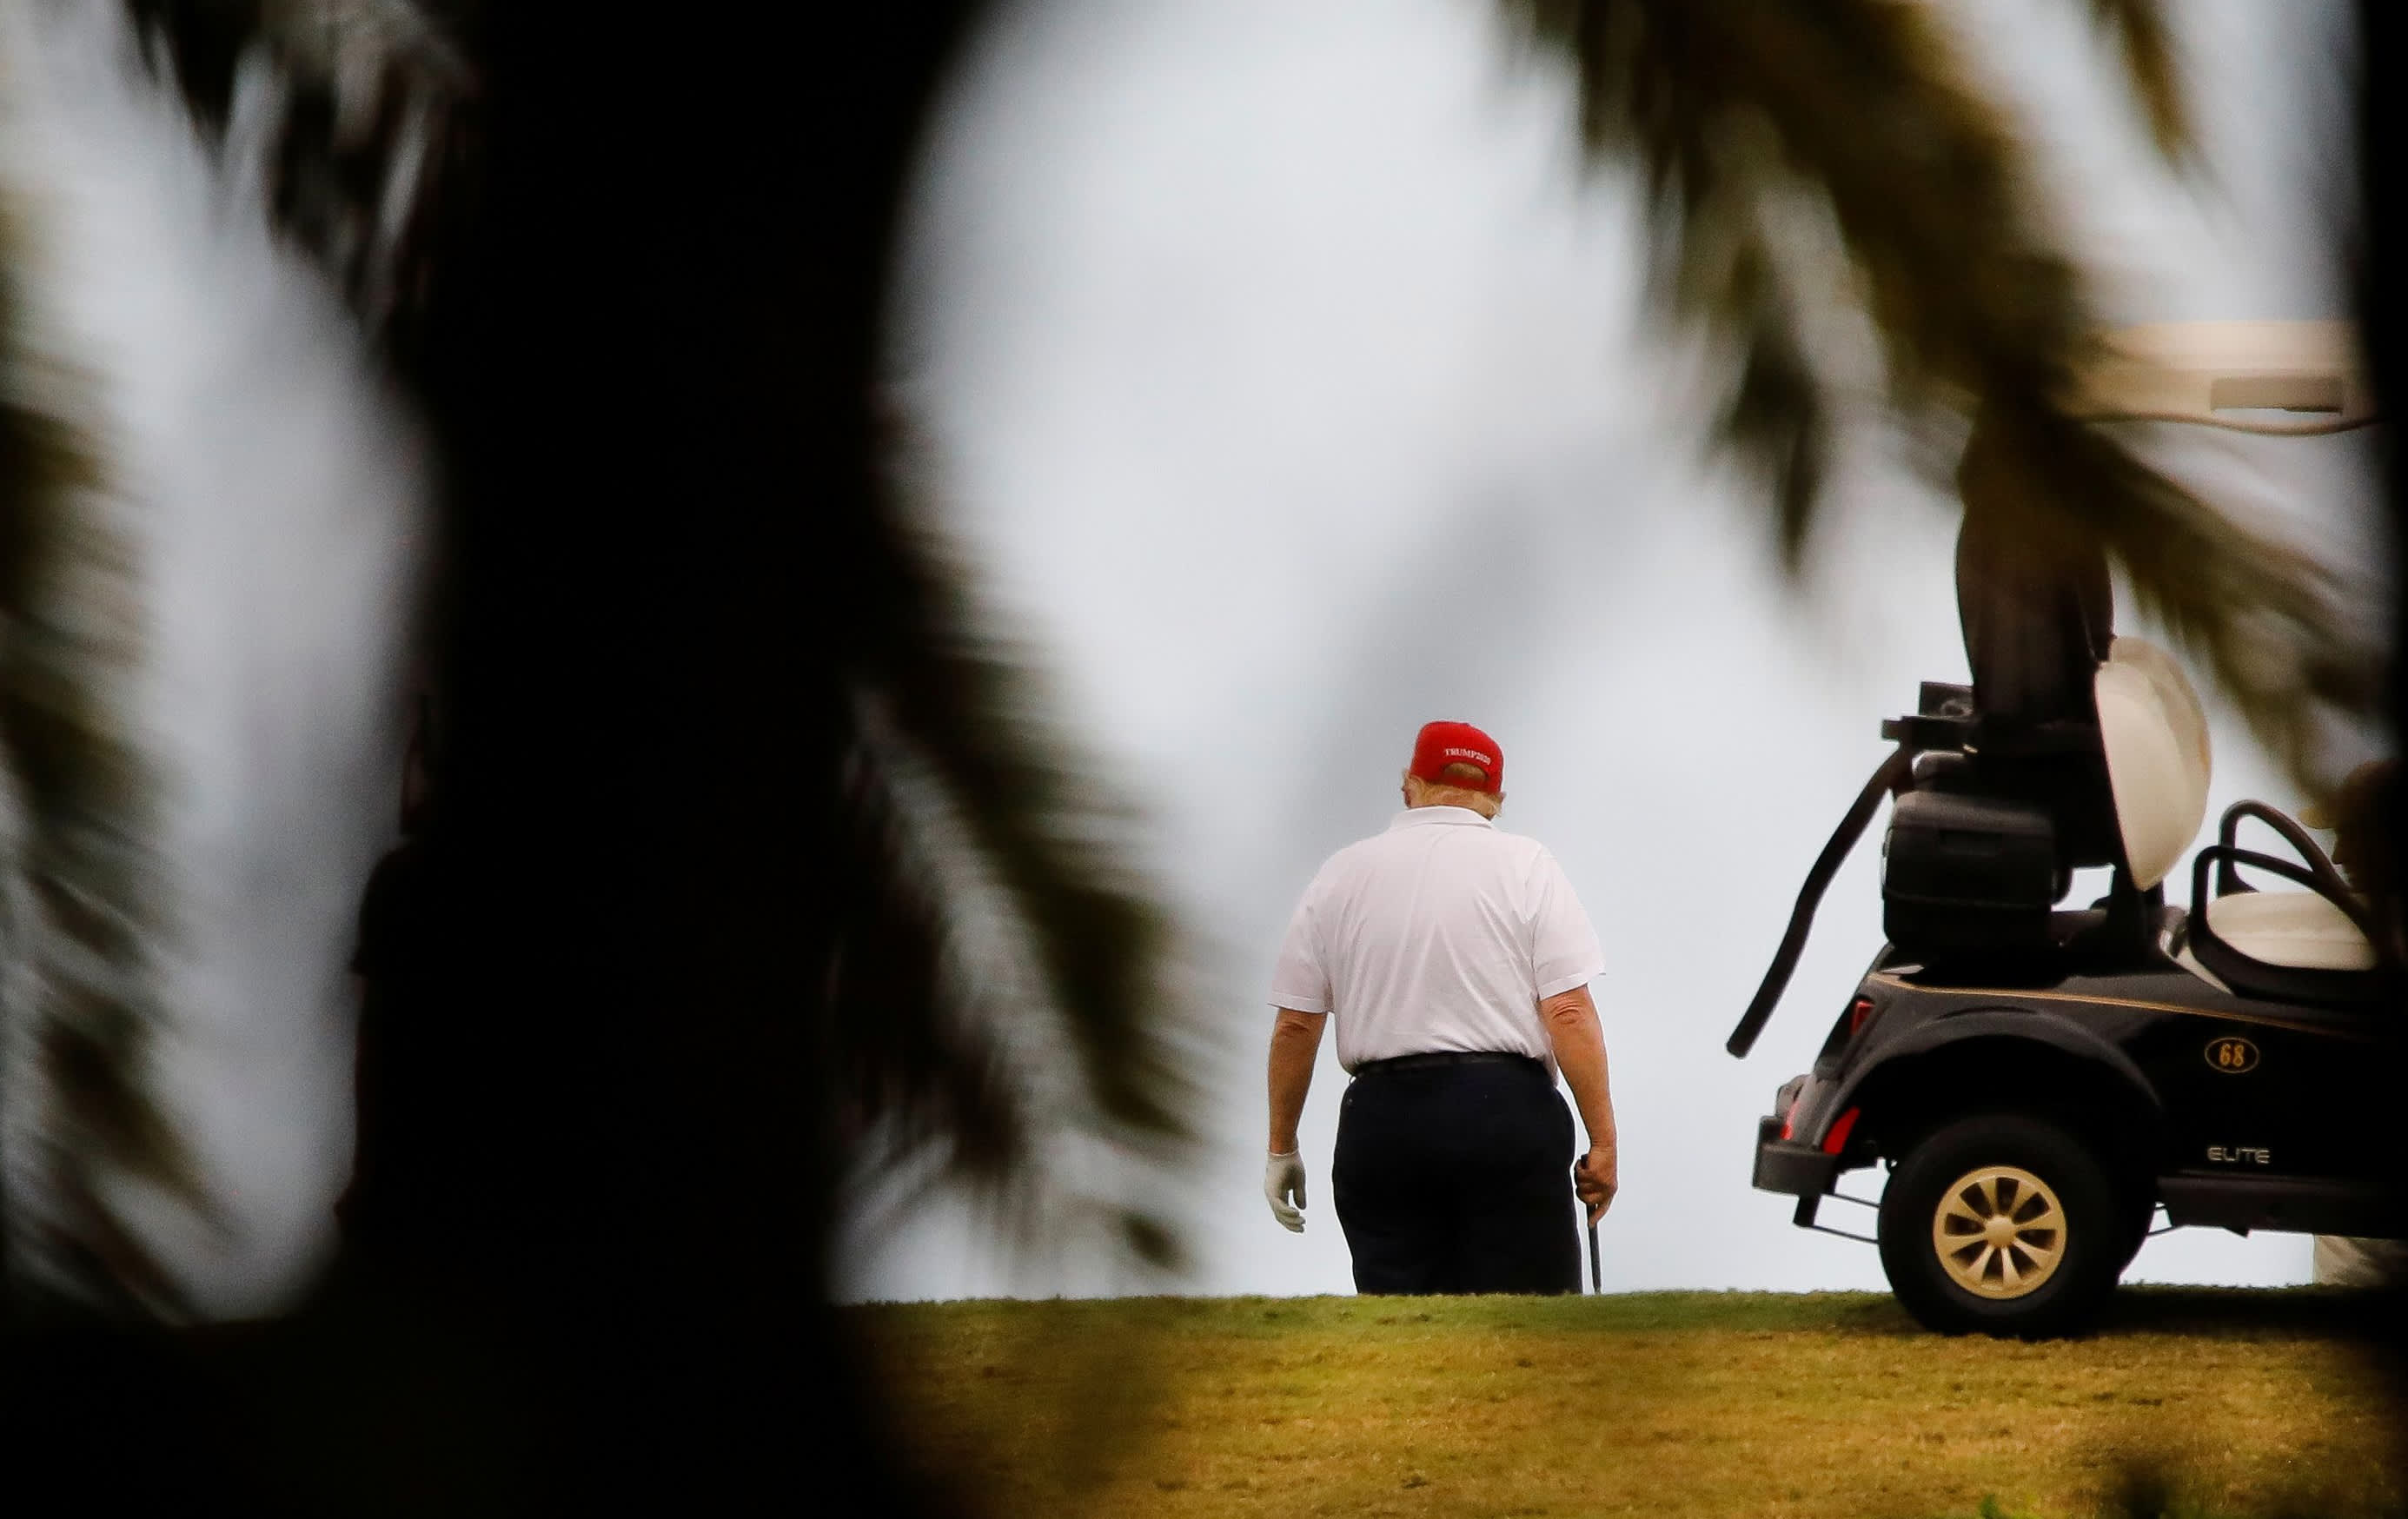 Palm Beach County looks to end Trump golf course lease after U.S. Capitol riot